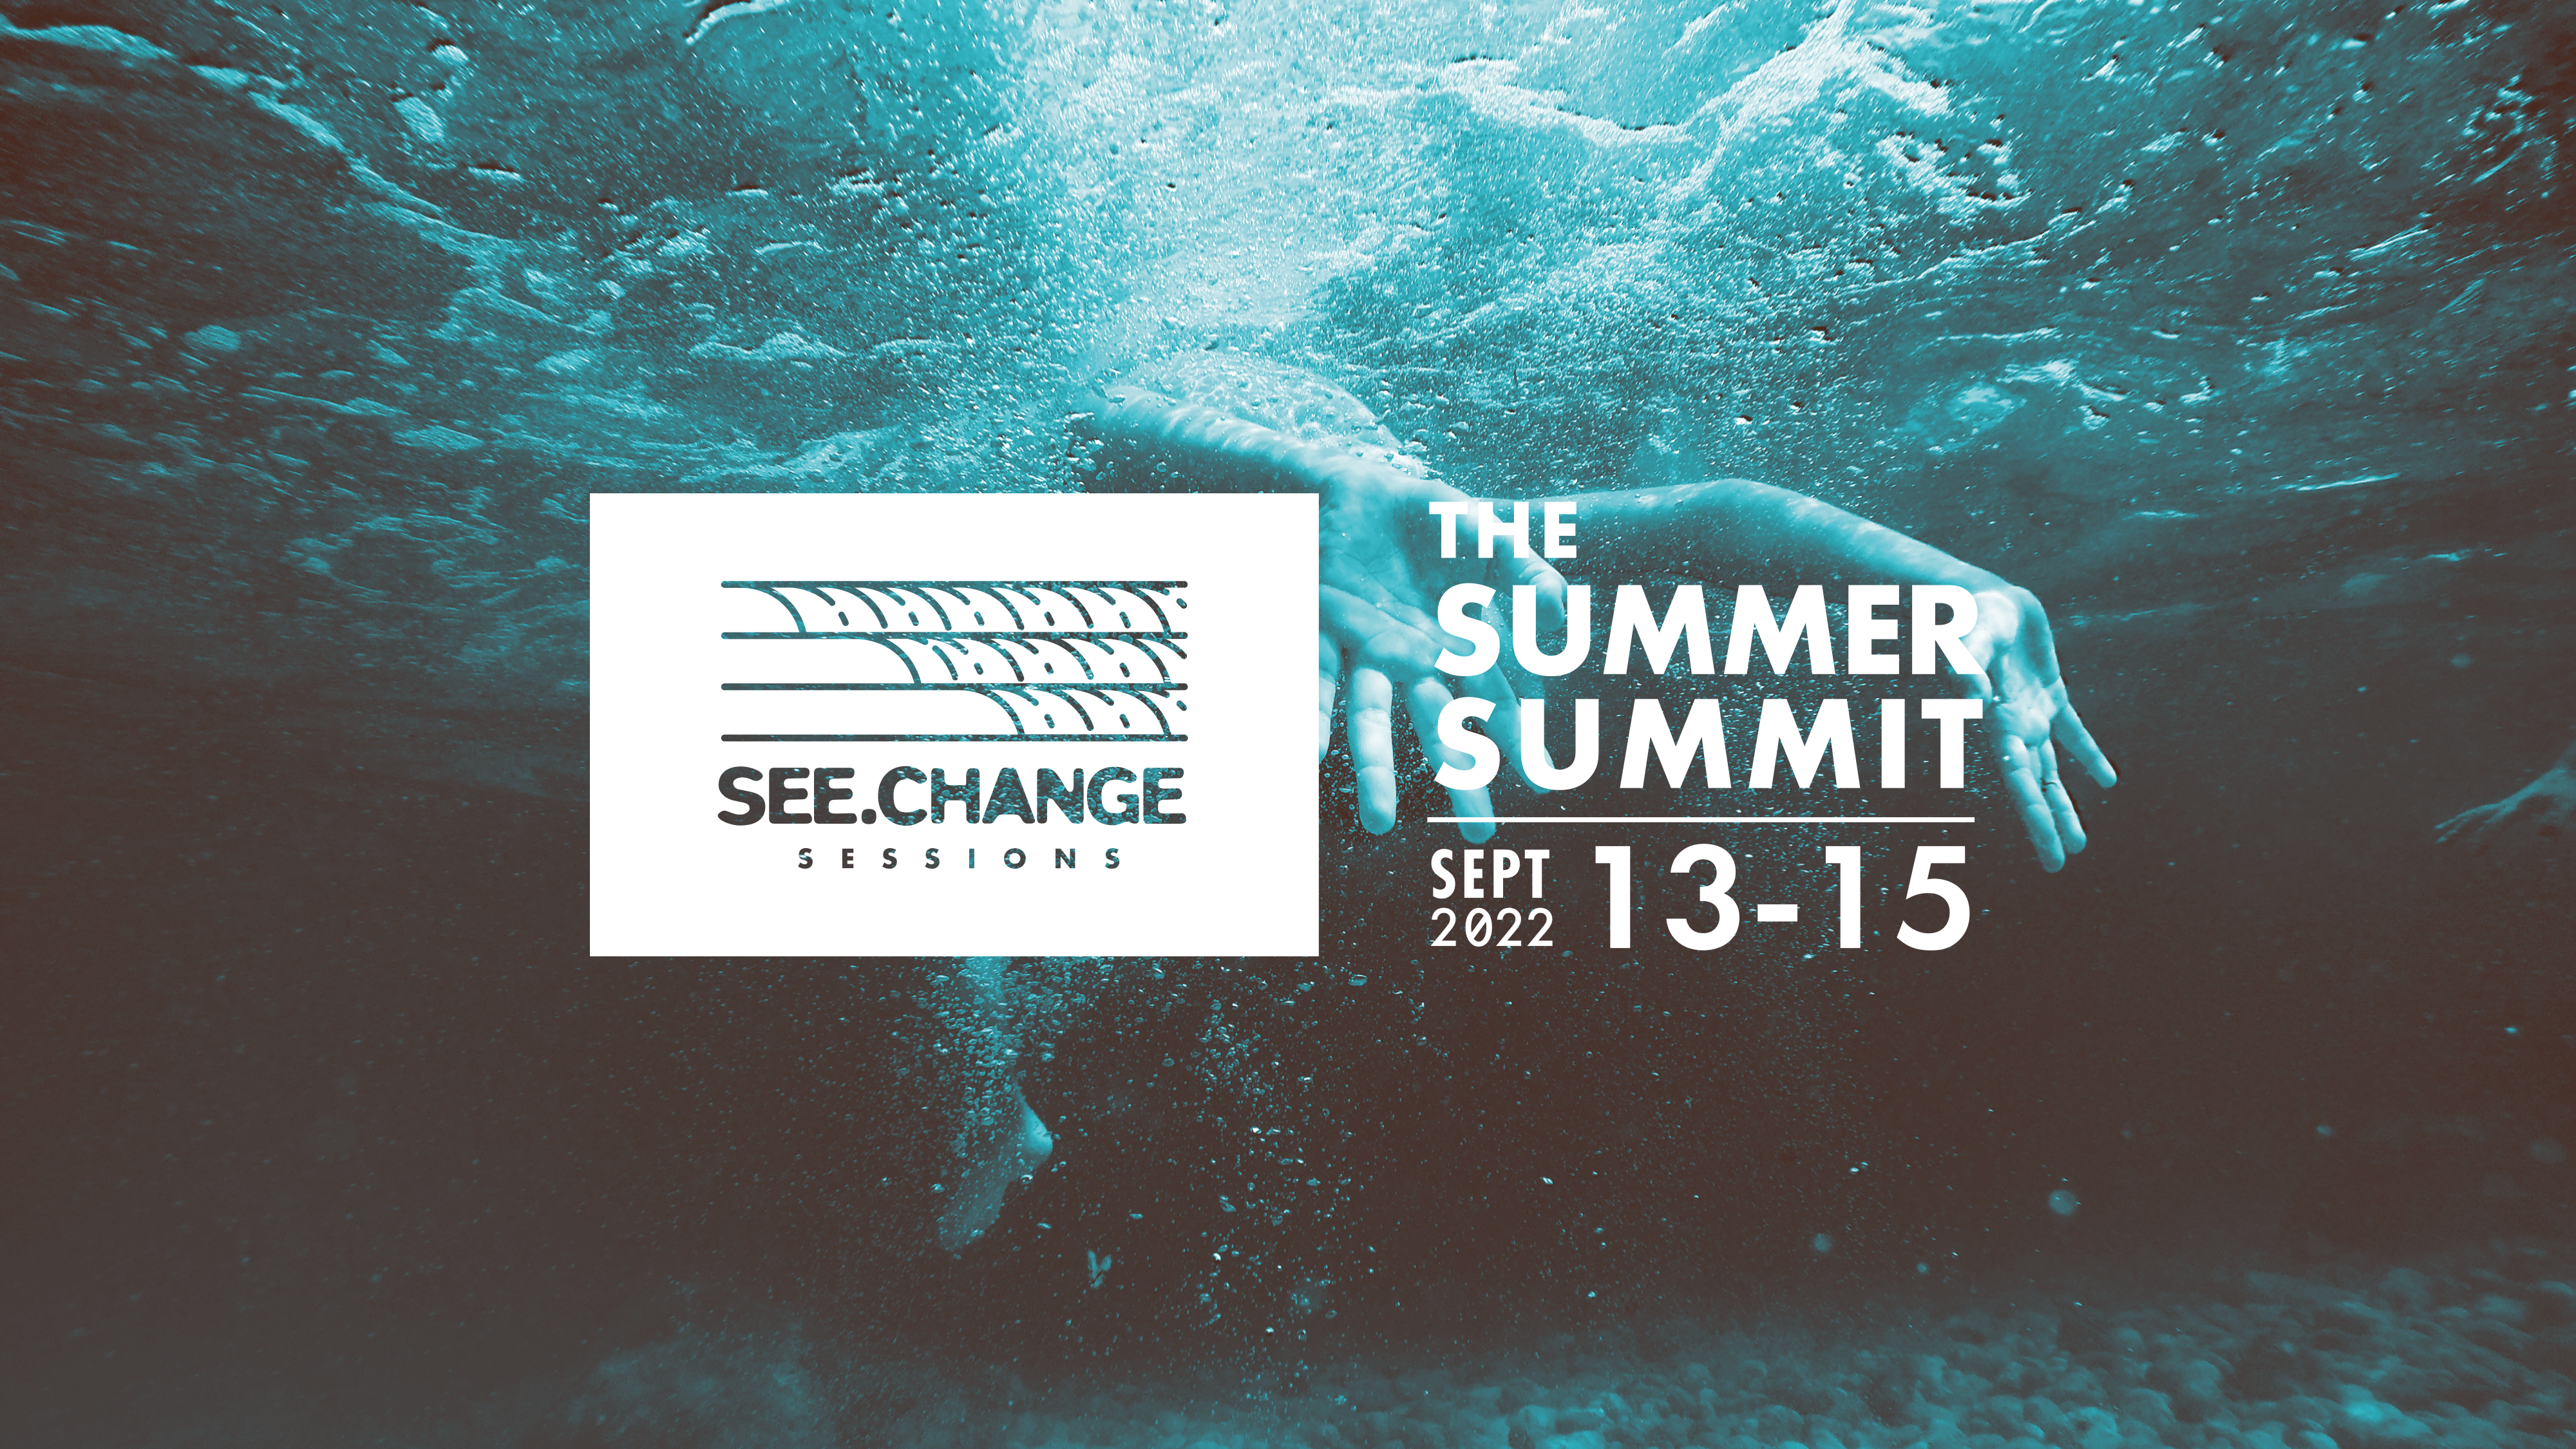 An infographic about See Change Sessions on September 13-15, 2022